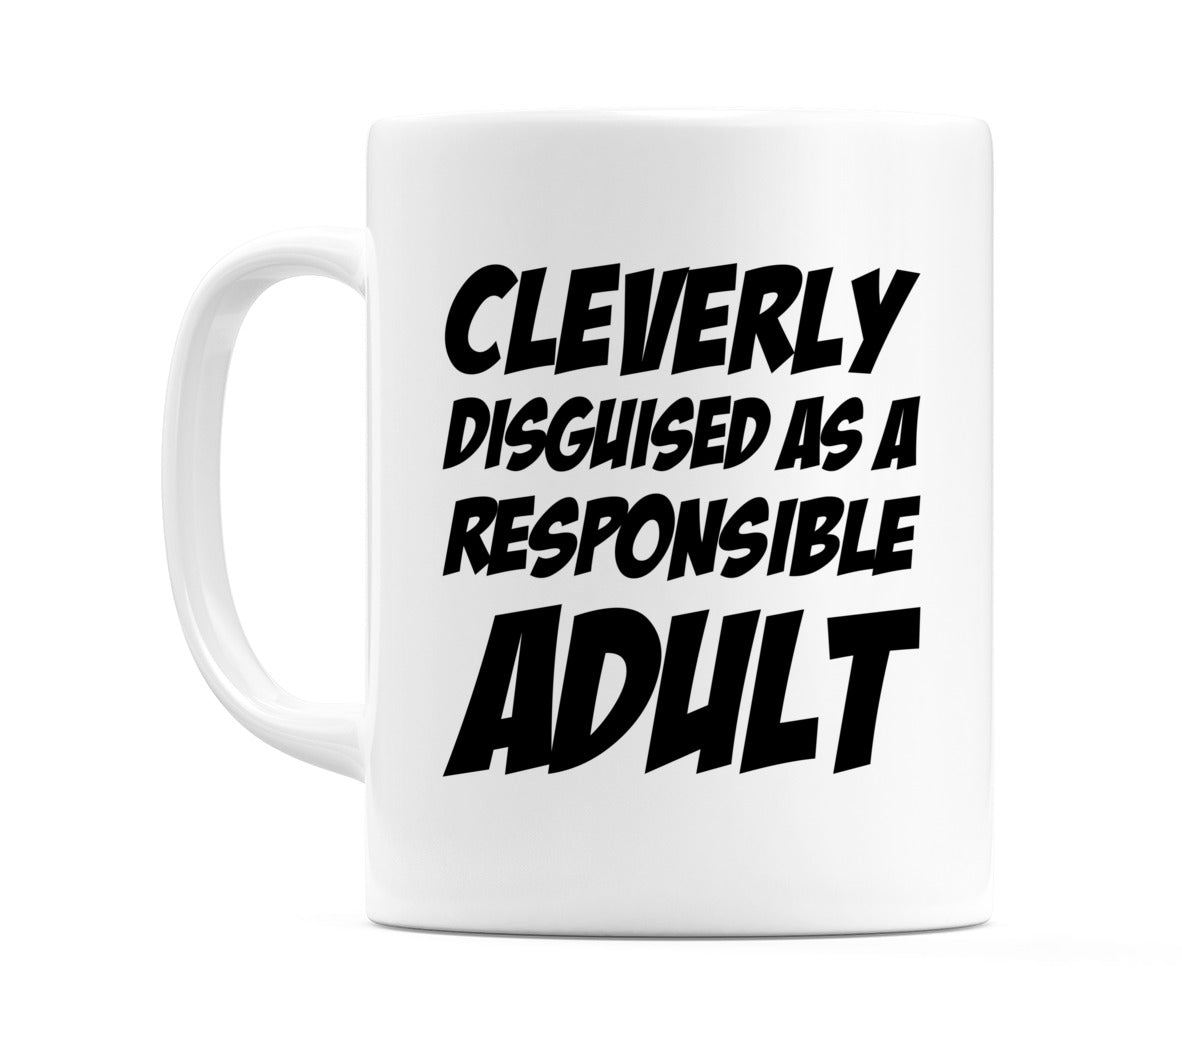 Cleverly Disguised as a Responsible Adult Mug